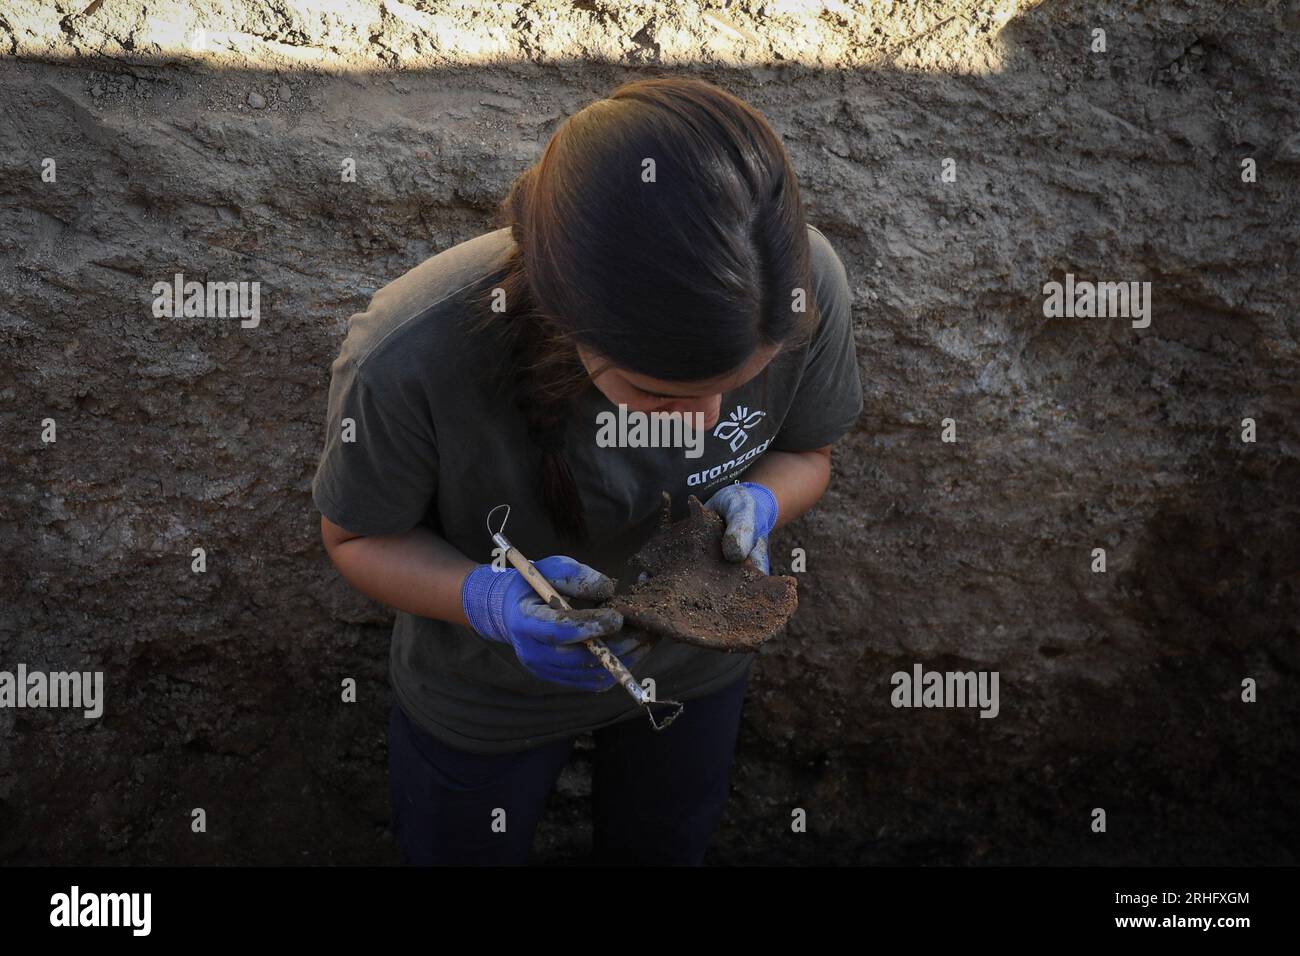 Madrid, Spain. 16th Aug, 2023. A forensic expert from the Aranzadi Science Society analyzes a bone from a skeleton during exhumation.The exhumation work continues on the bones of those retaliated against by the Franco dictatorship in the cemetery of the town of Colmenar Viejo in Madrid. (Photo by David Canales/SOPA Images/Sipa USA) Credit: Sipa USA/Alamy Live News Stock Photo